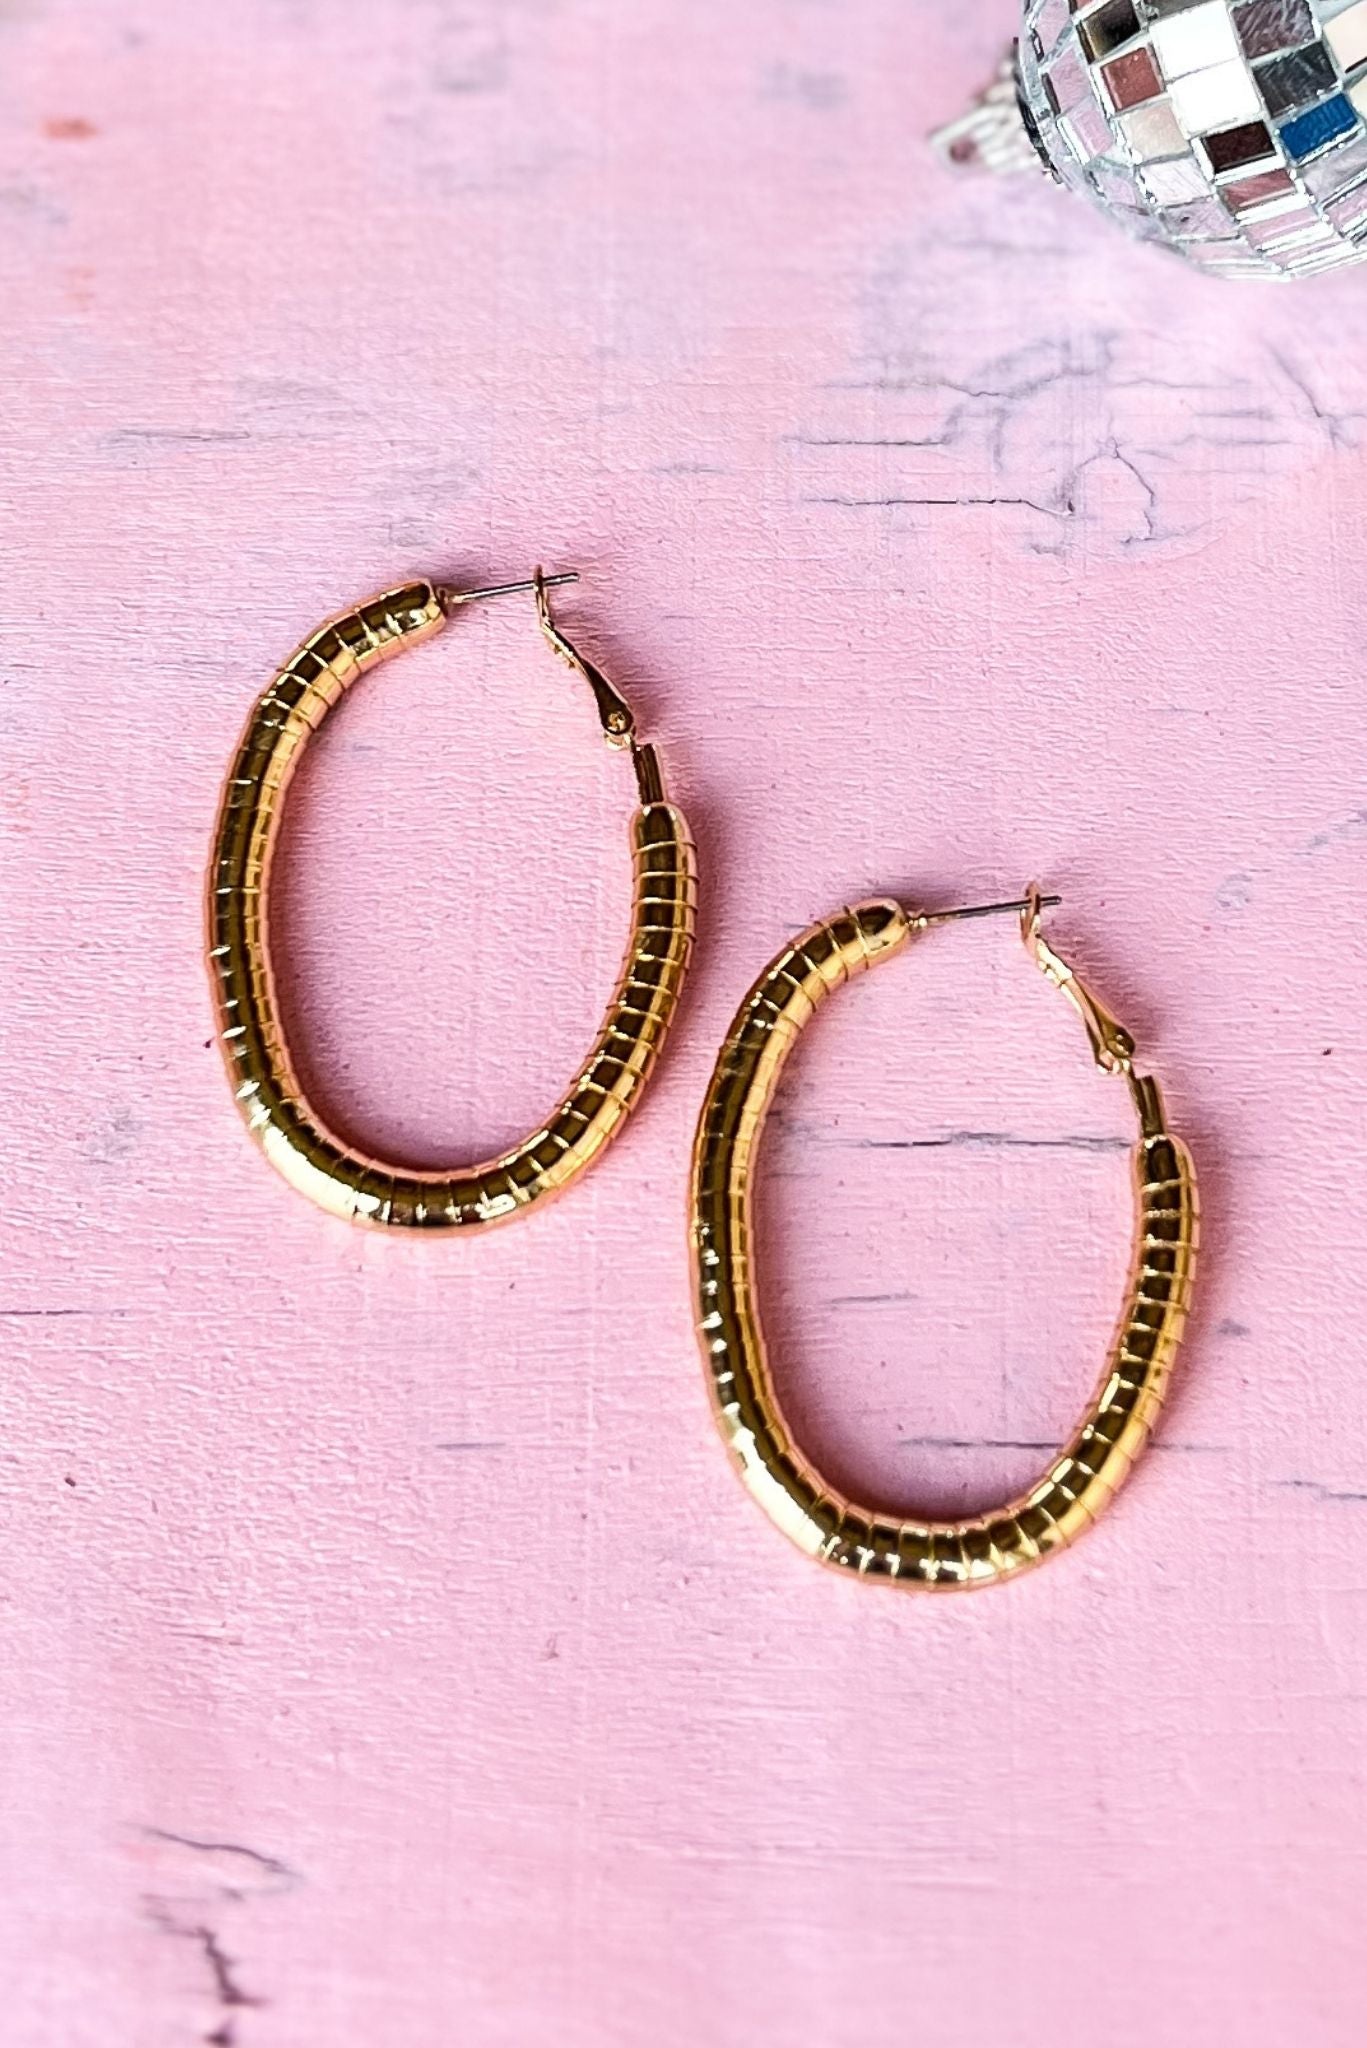 Gold Metal Oval Gooseneck Hoop Earrings, Accessory, Earrings, Shop Style Your Senses by Mallory Fitzsimmons